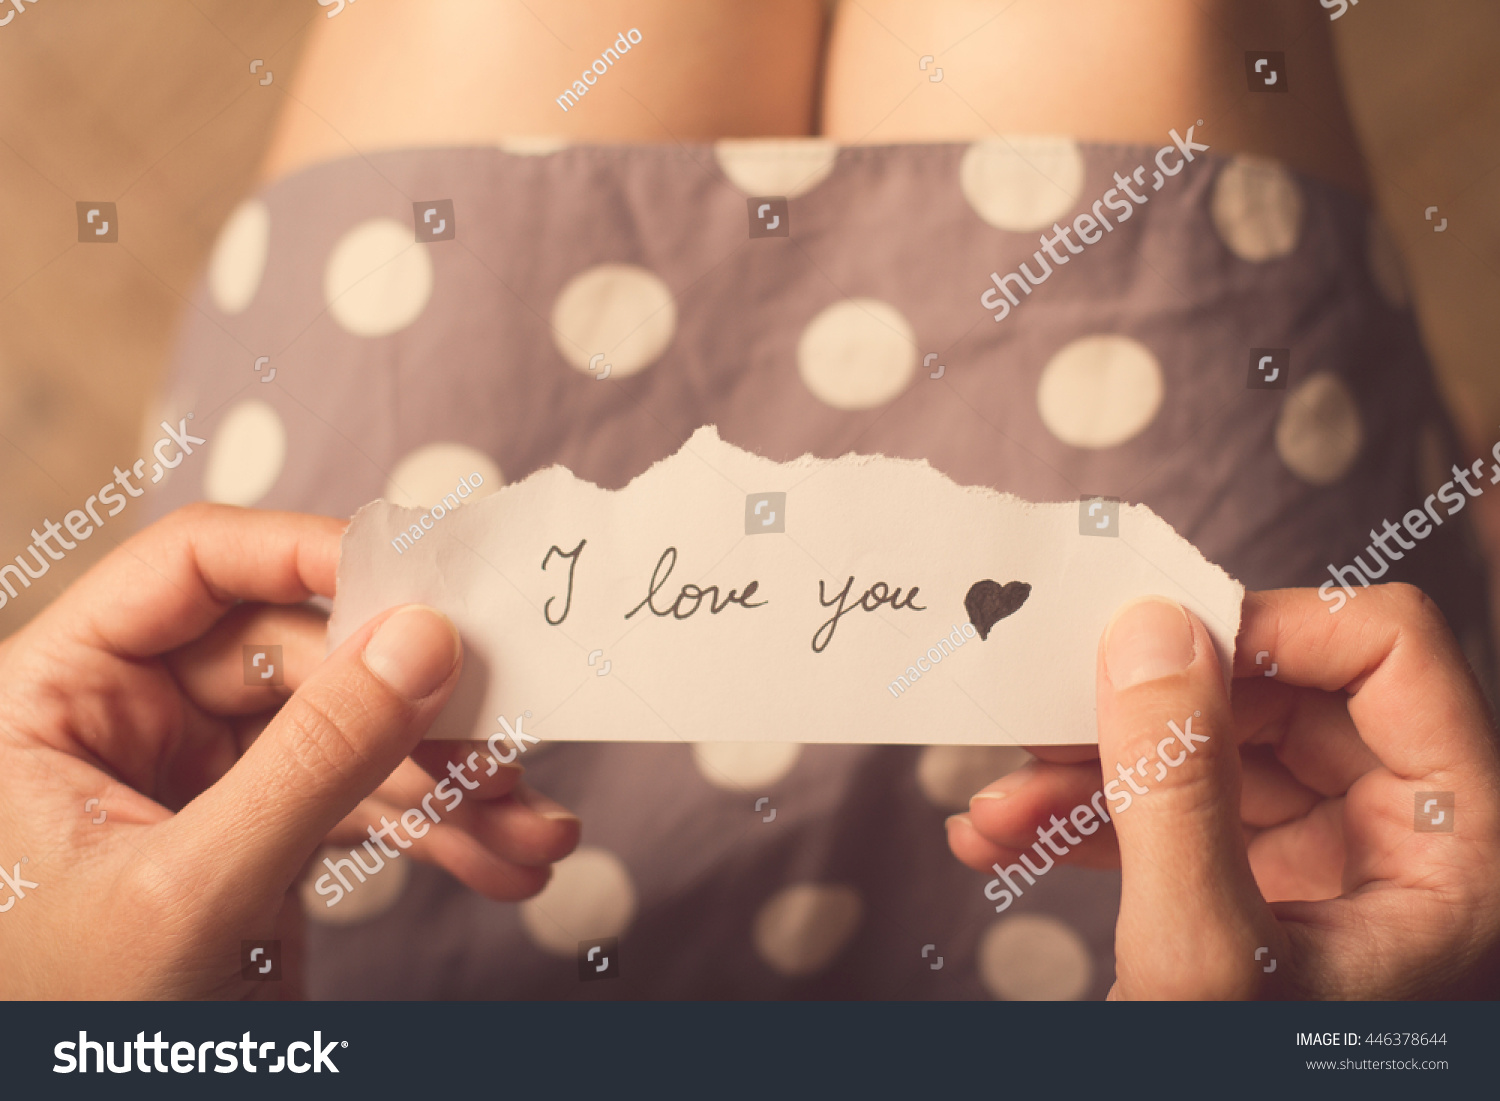 Top view of woman in dotted dress holding a paper message with the text I love you #446378644